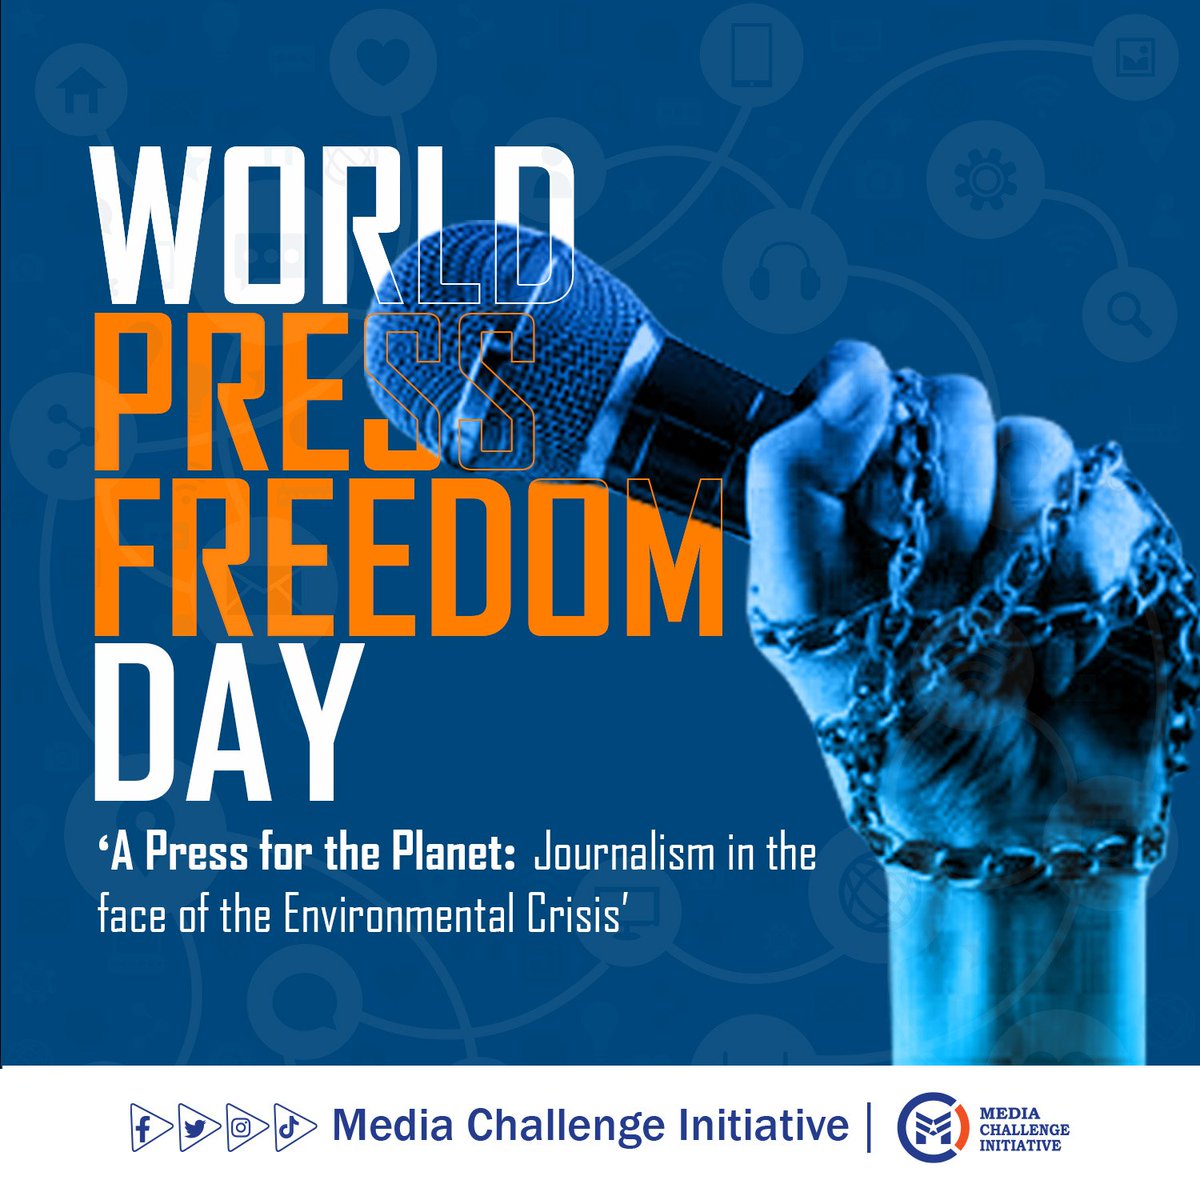 Happy #WorldPressFreedomDay 🗞📻📺 As the Media Challenge Initiative, part of our commitment is to train #nextgenjournalists to tell stories that amplify voices of the underrepresented communities that are greatly impacted by #climatechange. #PressForThePlanet